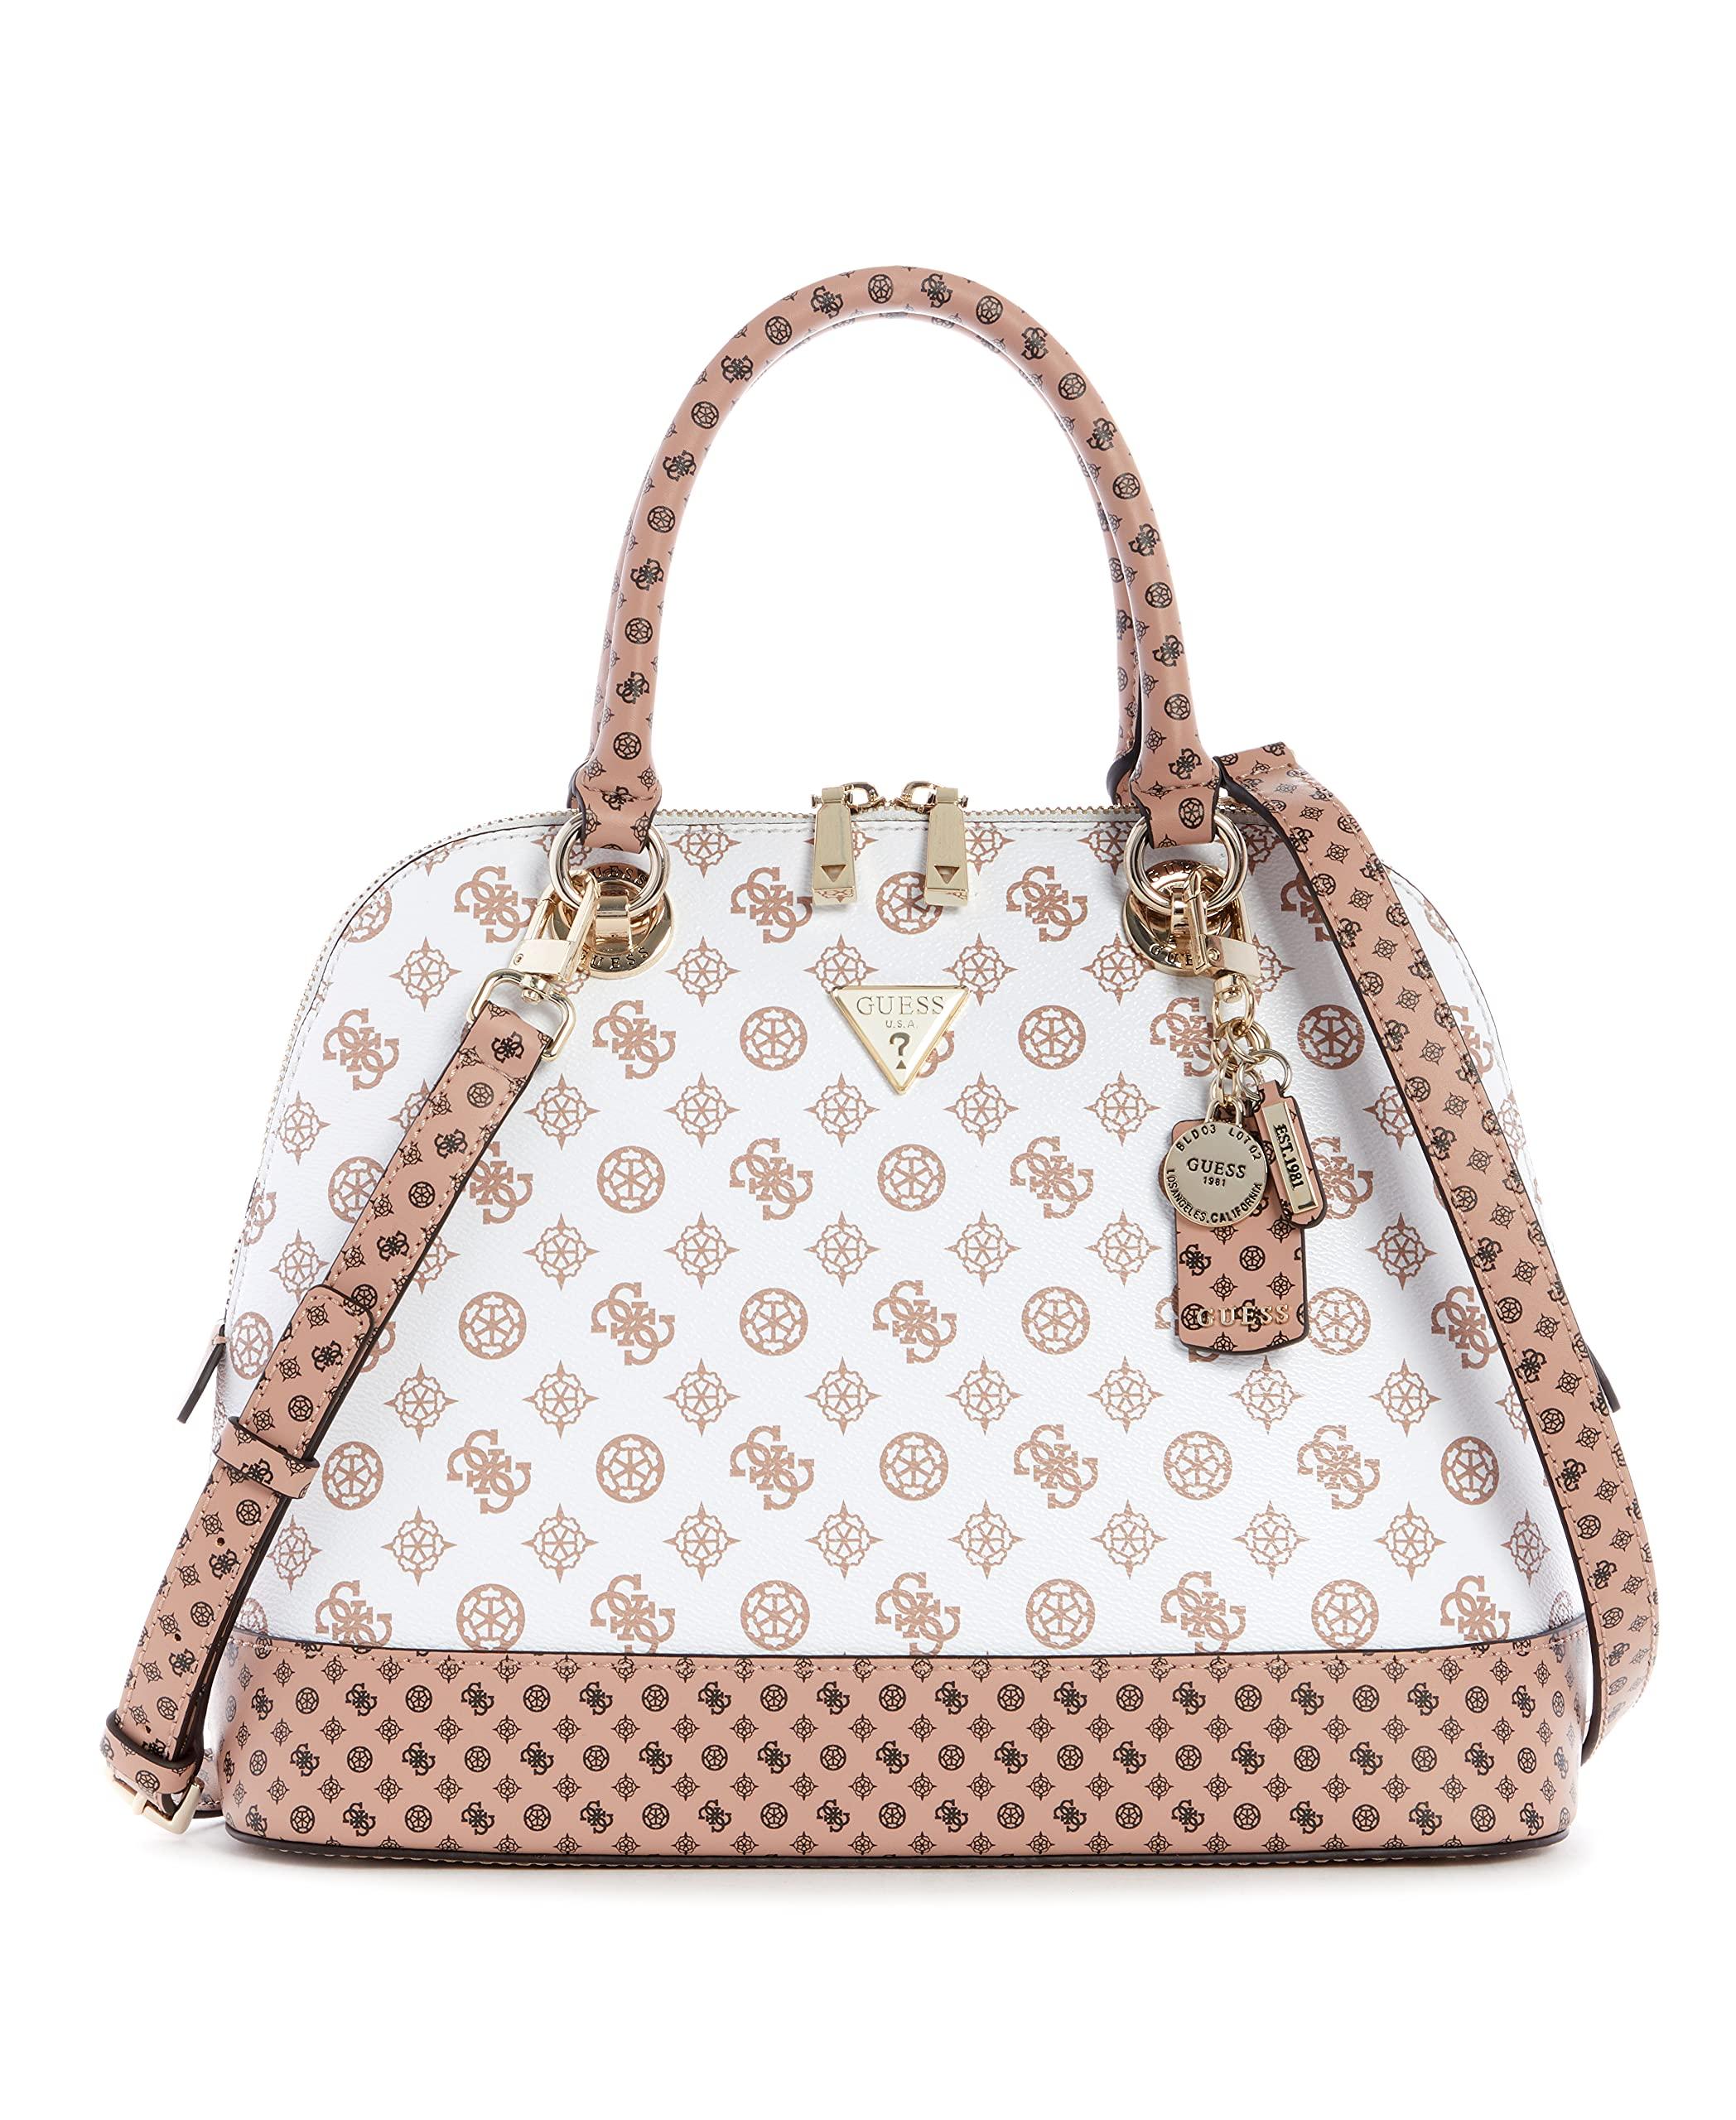 Guess Cessily Dome Satchel Bag White Multi - Lyst